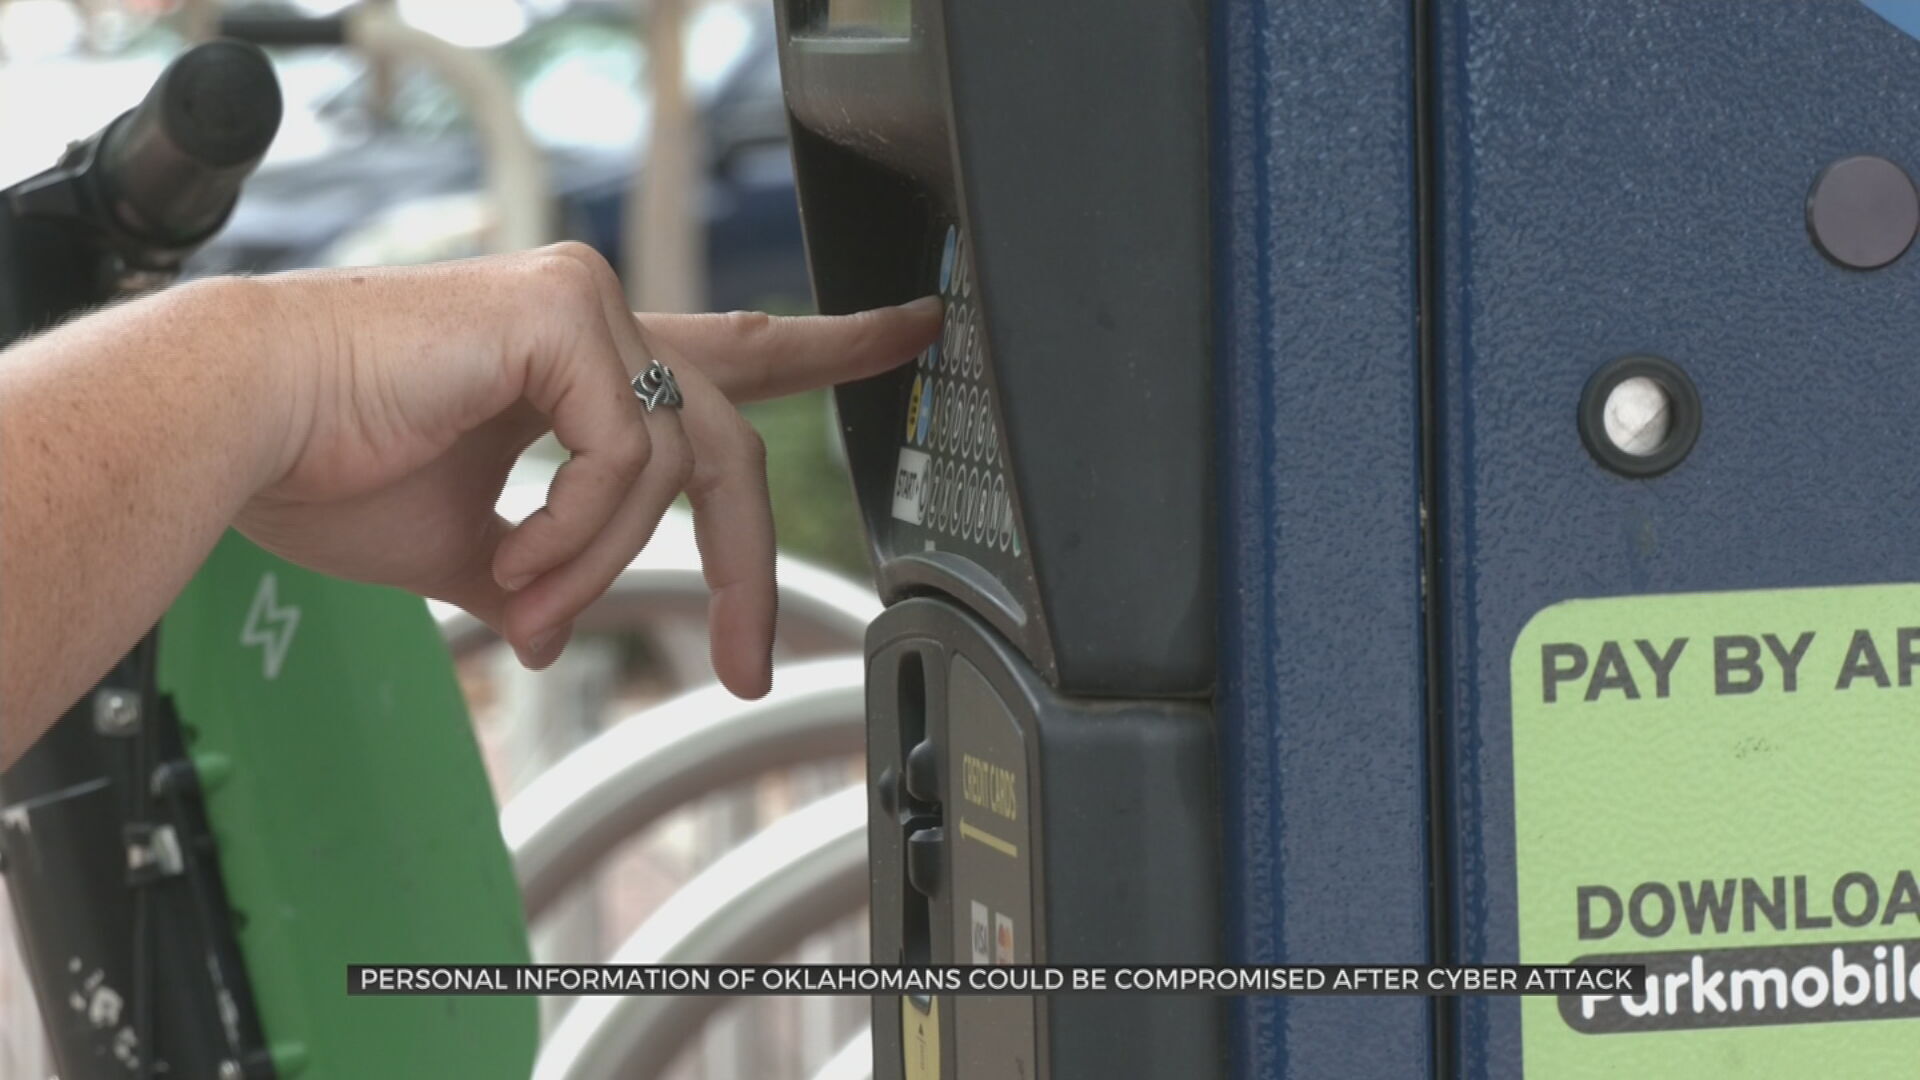 Personal Information Could Be Compromised After Cyberattack On Tulsa Parking App 